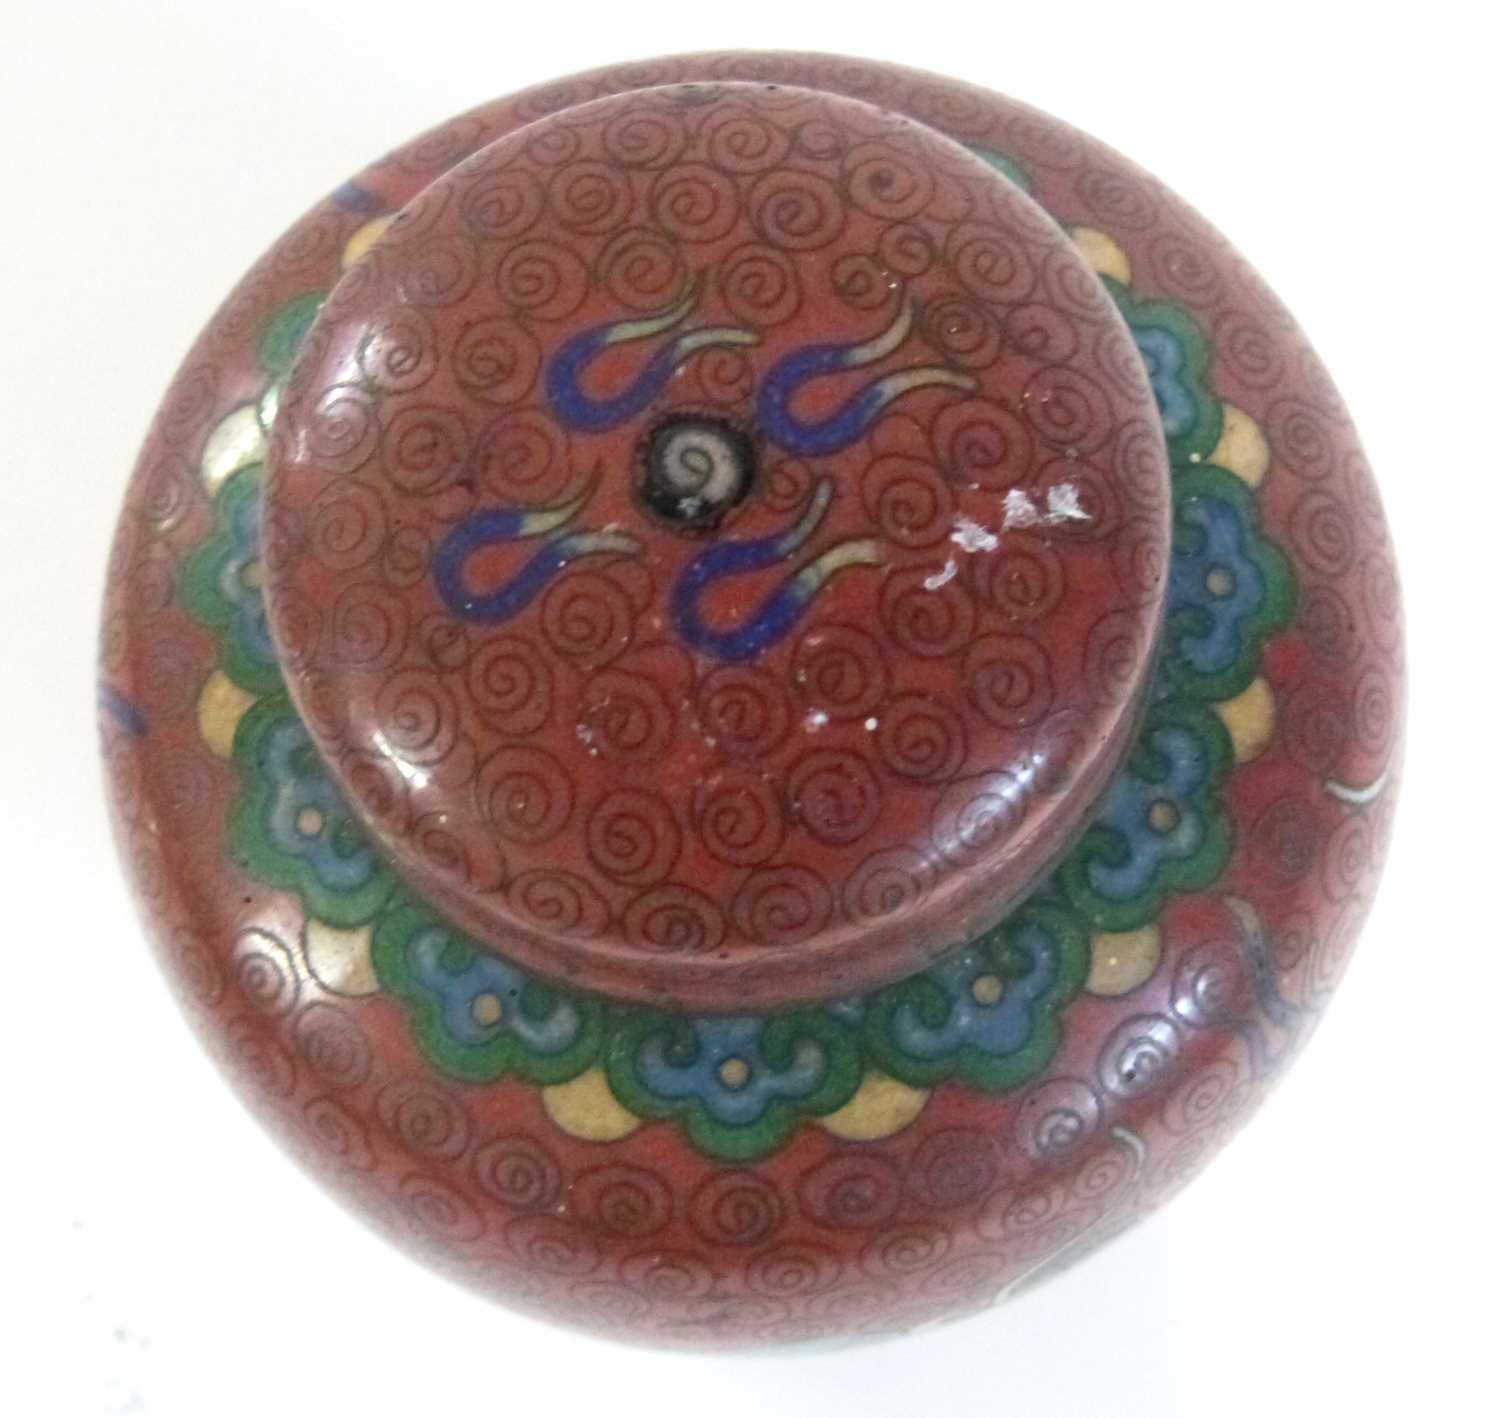 Cloisonne incense burner of globular form with pierced cover together with a small Cloisonne jar and - Image 27 of 36